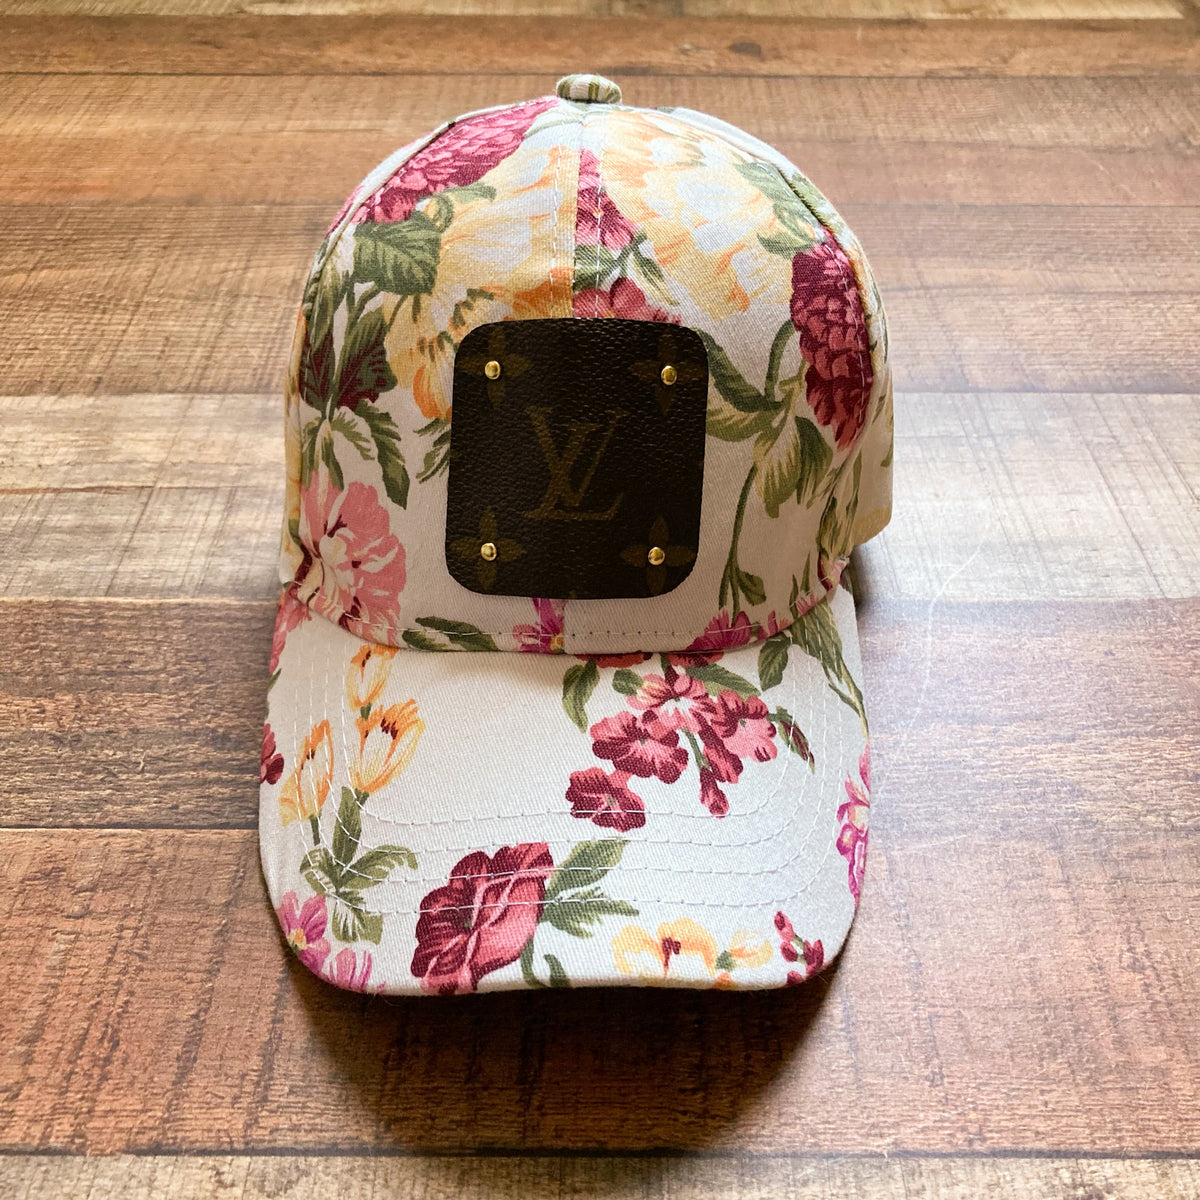 Upcycled LV Patch Baseball Hat-Gray – LuBella's